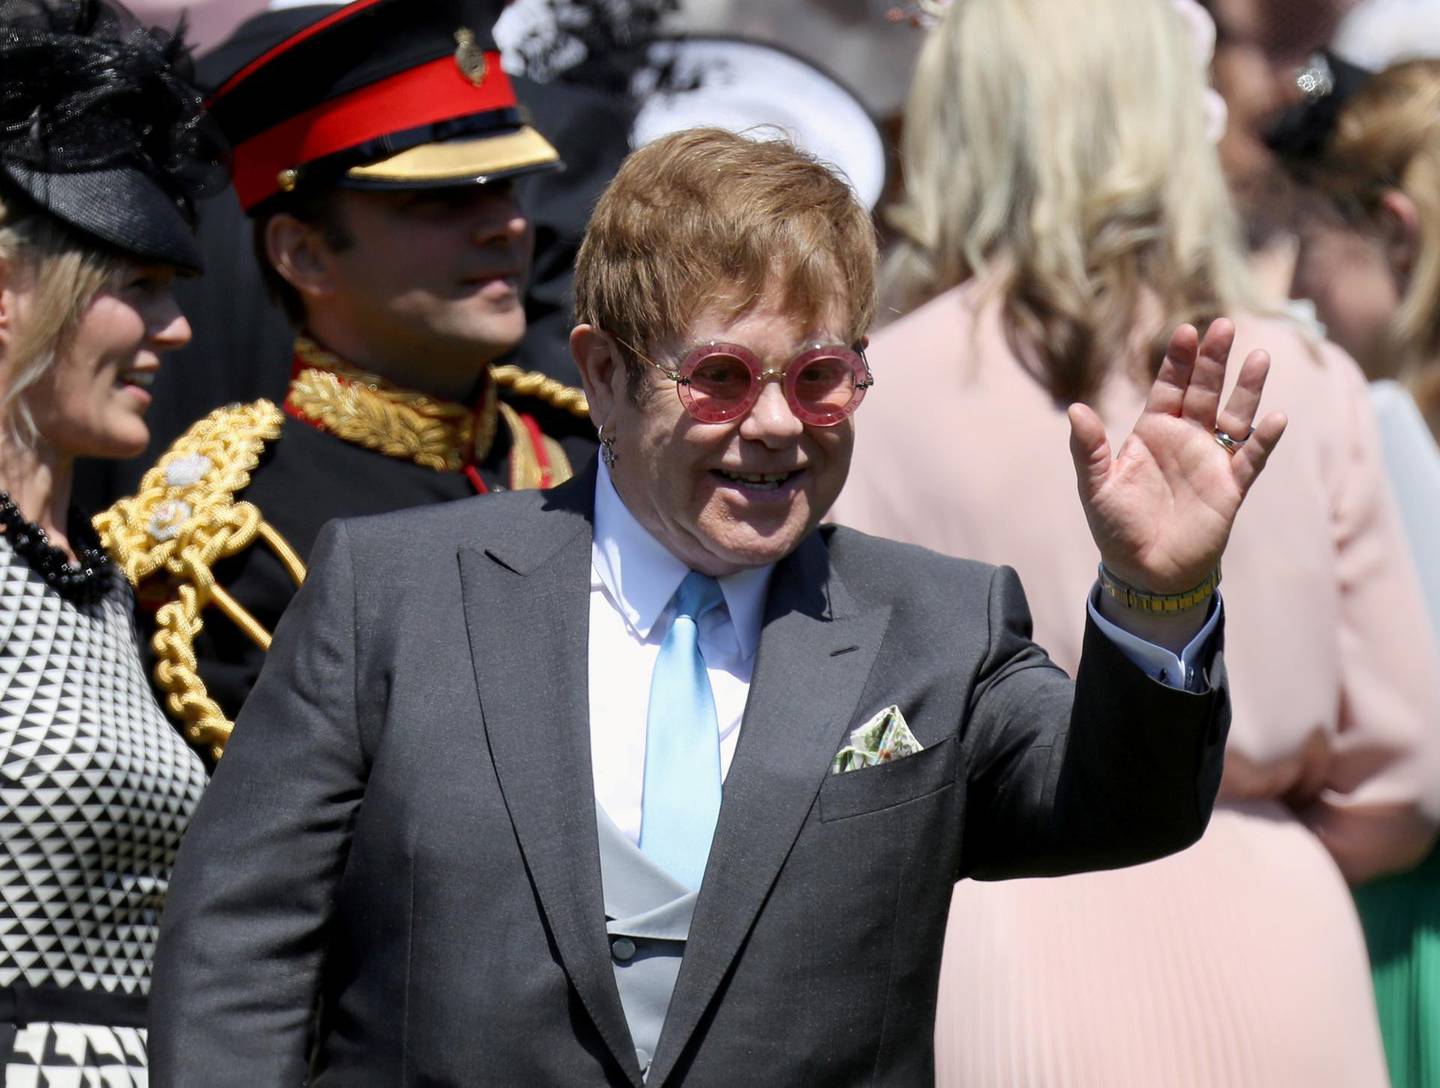 FILE PHOTO: Sir Elton John arrives at the wedding of Prince Harry to Ms Meghan Markle at St George's Chapel, Windsor Castle on May 19, 2018 in Windsor, England. Chris Jackson/Pool via REUTERS/File Photo